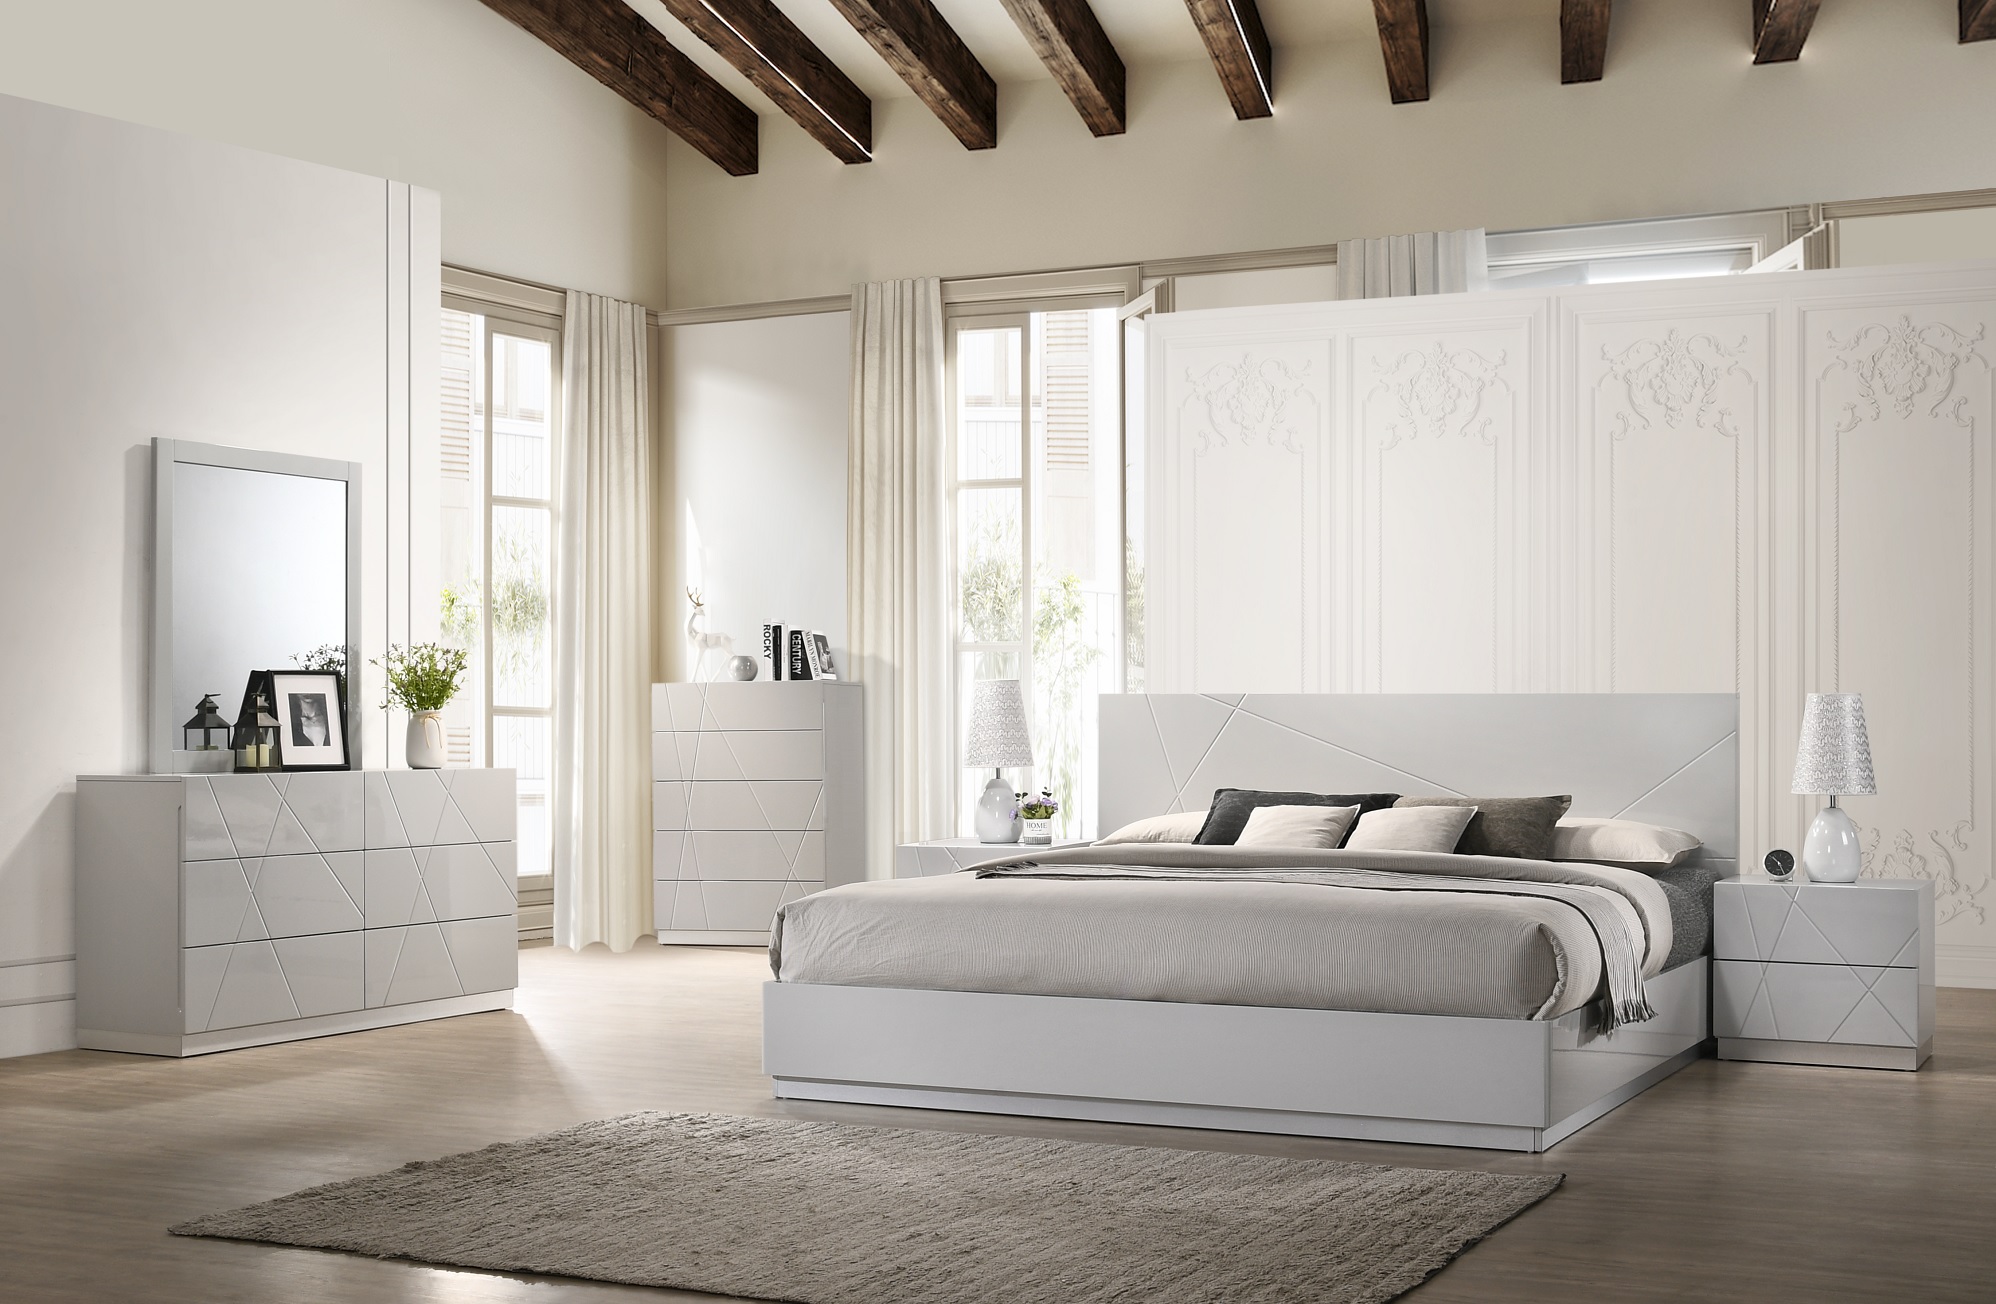 Modern Bedroom Furniture Ideas: Designing Comfort And Style For Your Space